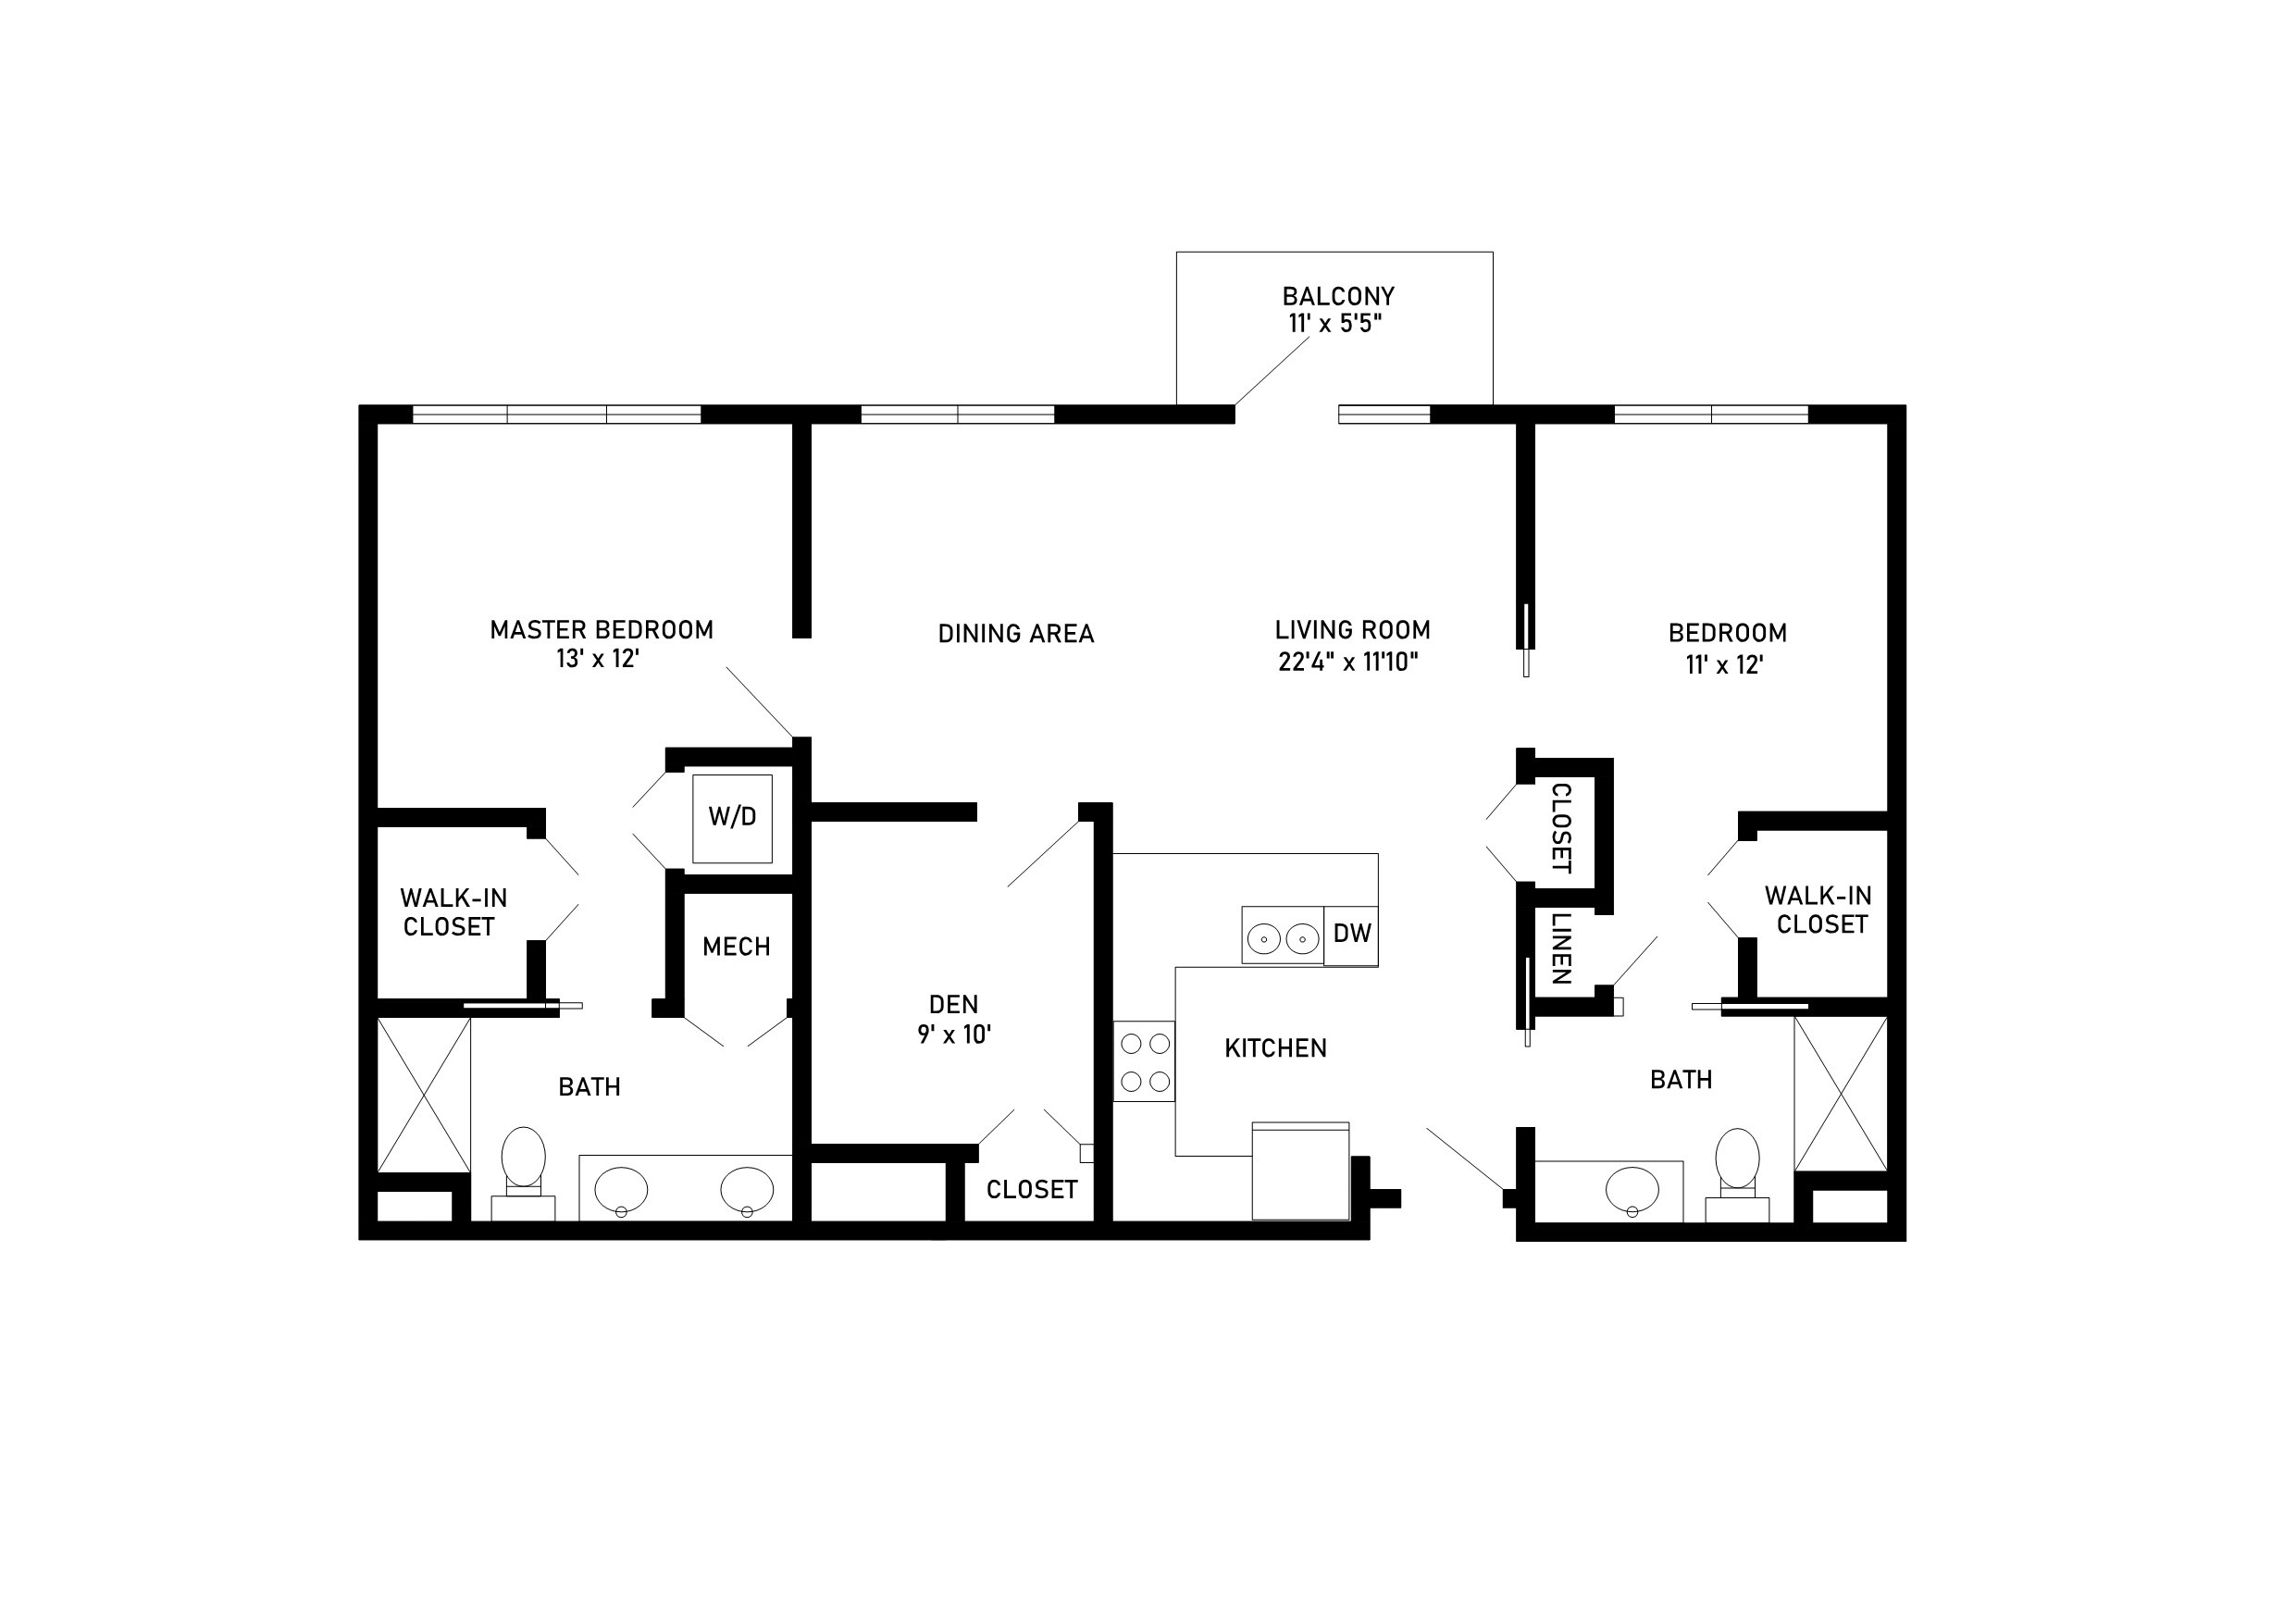 Thumbnail image town center 2 bed apartment 1193 square feet